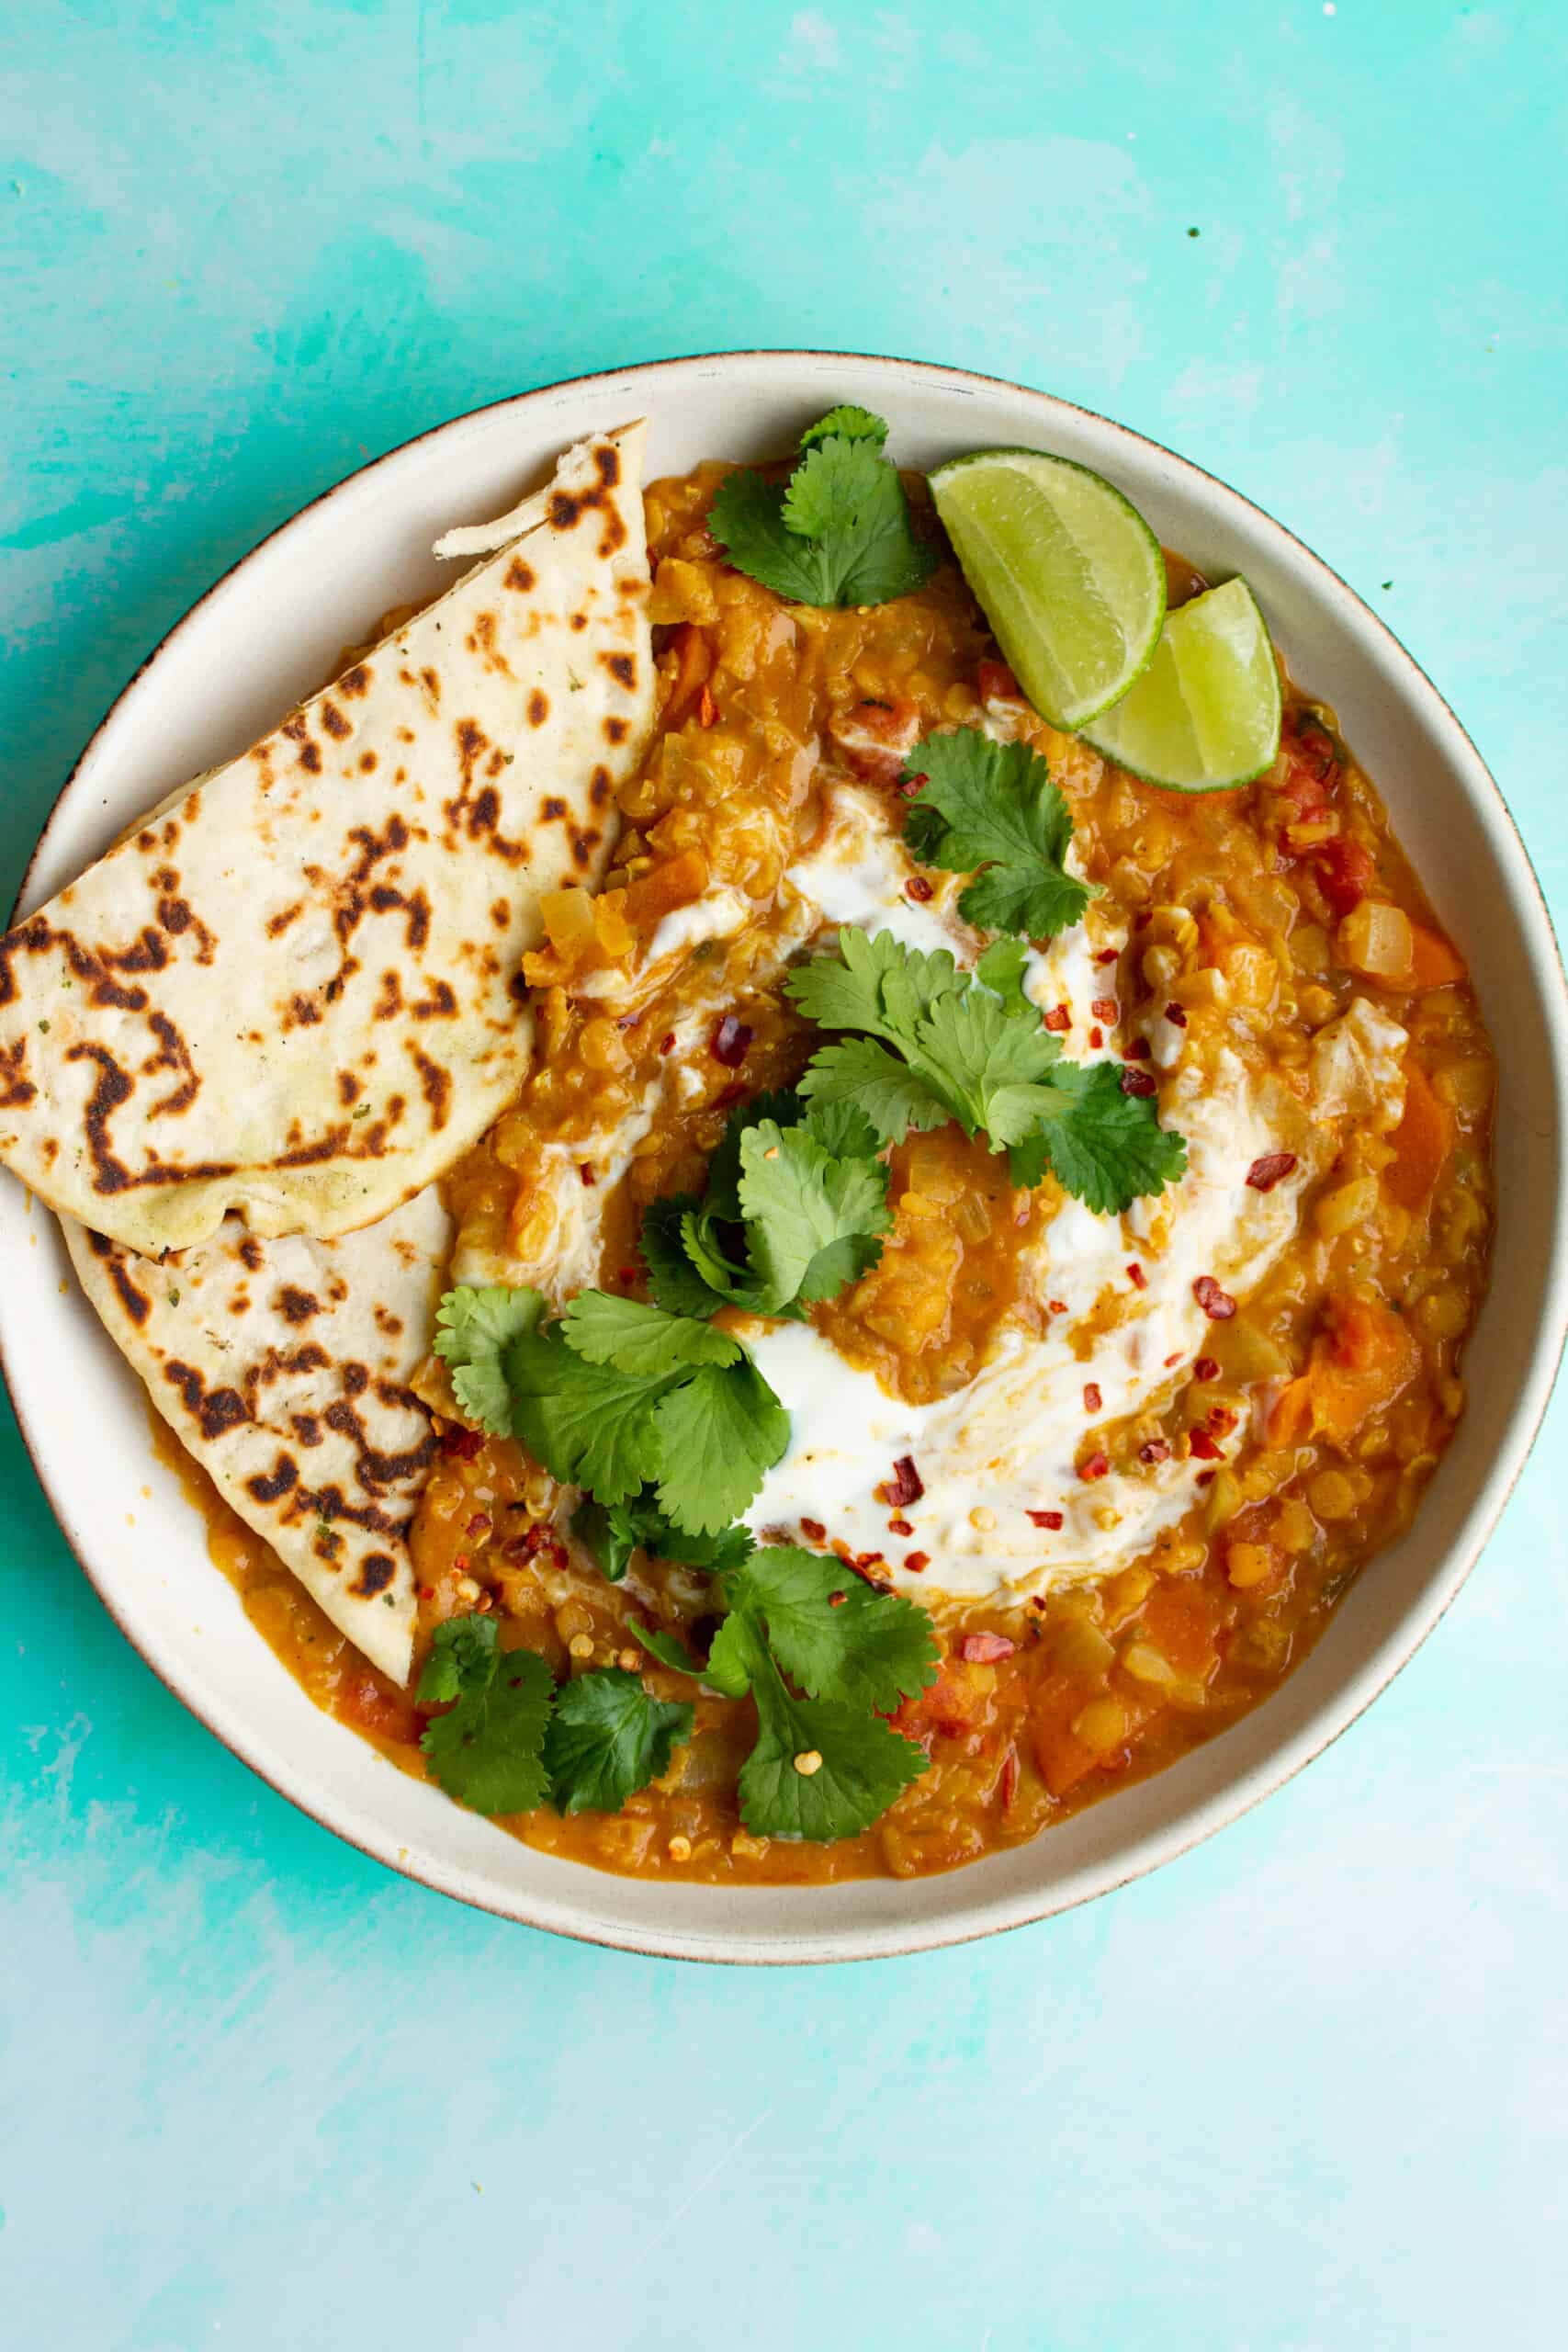 A bowl of red lentil dahl topped with coriander, lime wedges and chilli flakes with 2 halves of naan bread in the bowl.